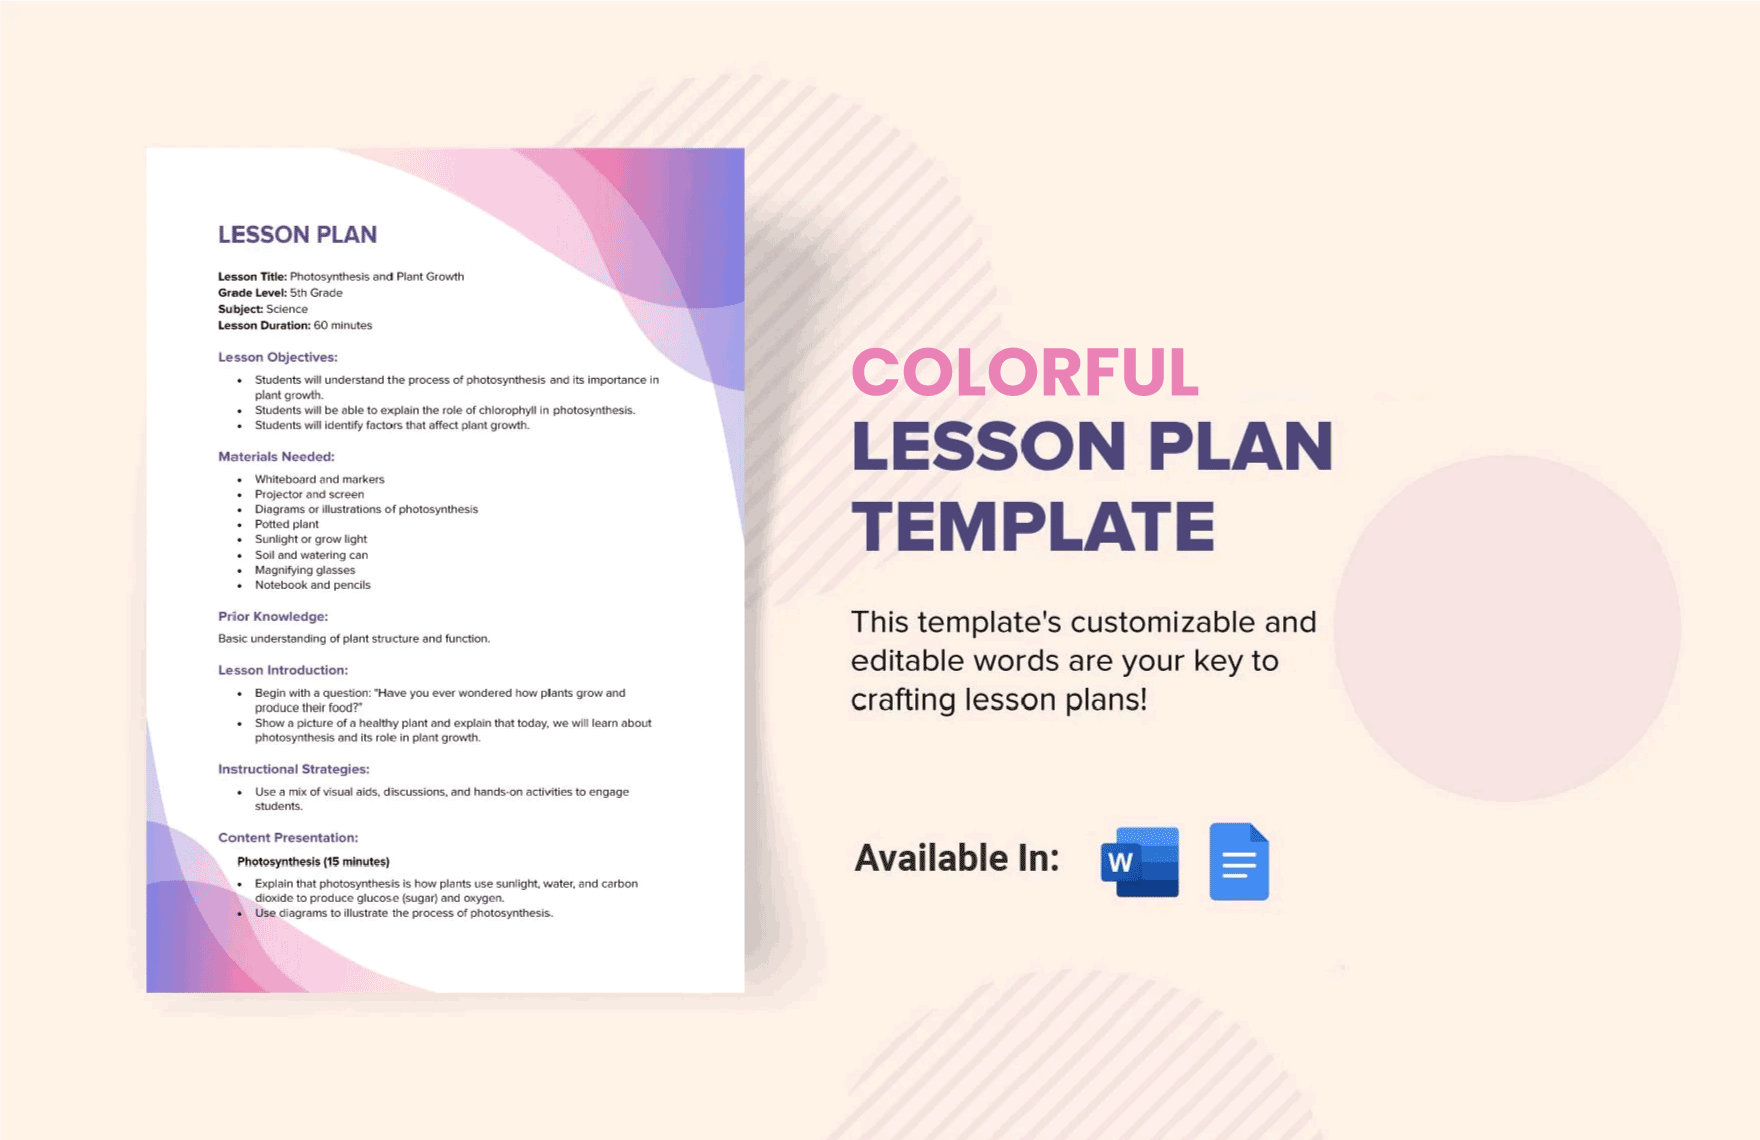 Free Colorful Lesson Plan Template in Word, Google Docs, PDF